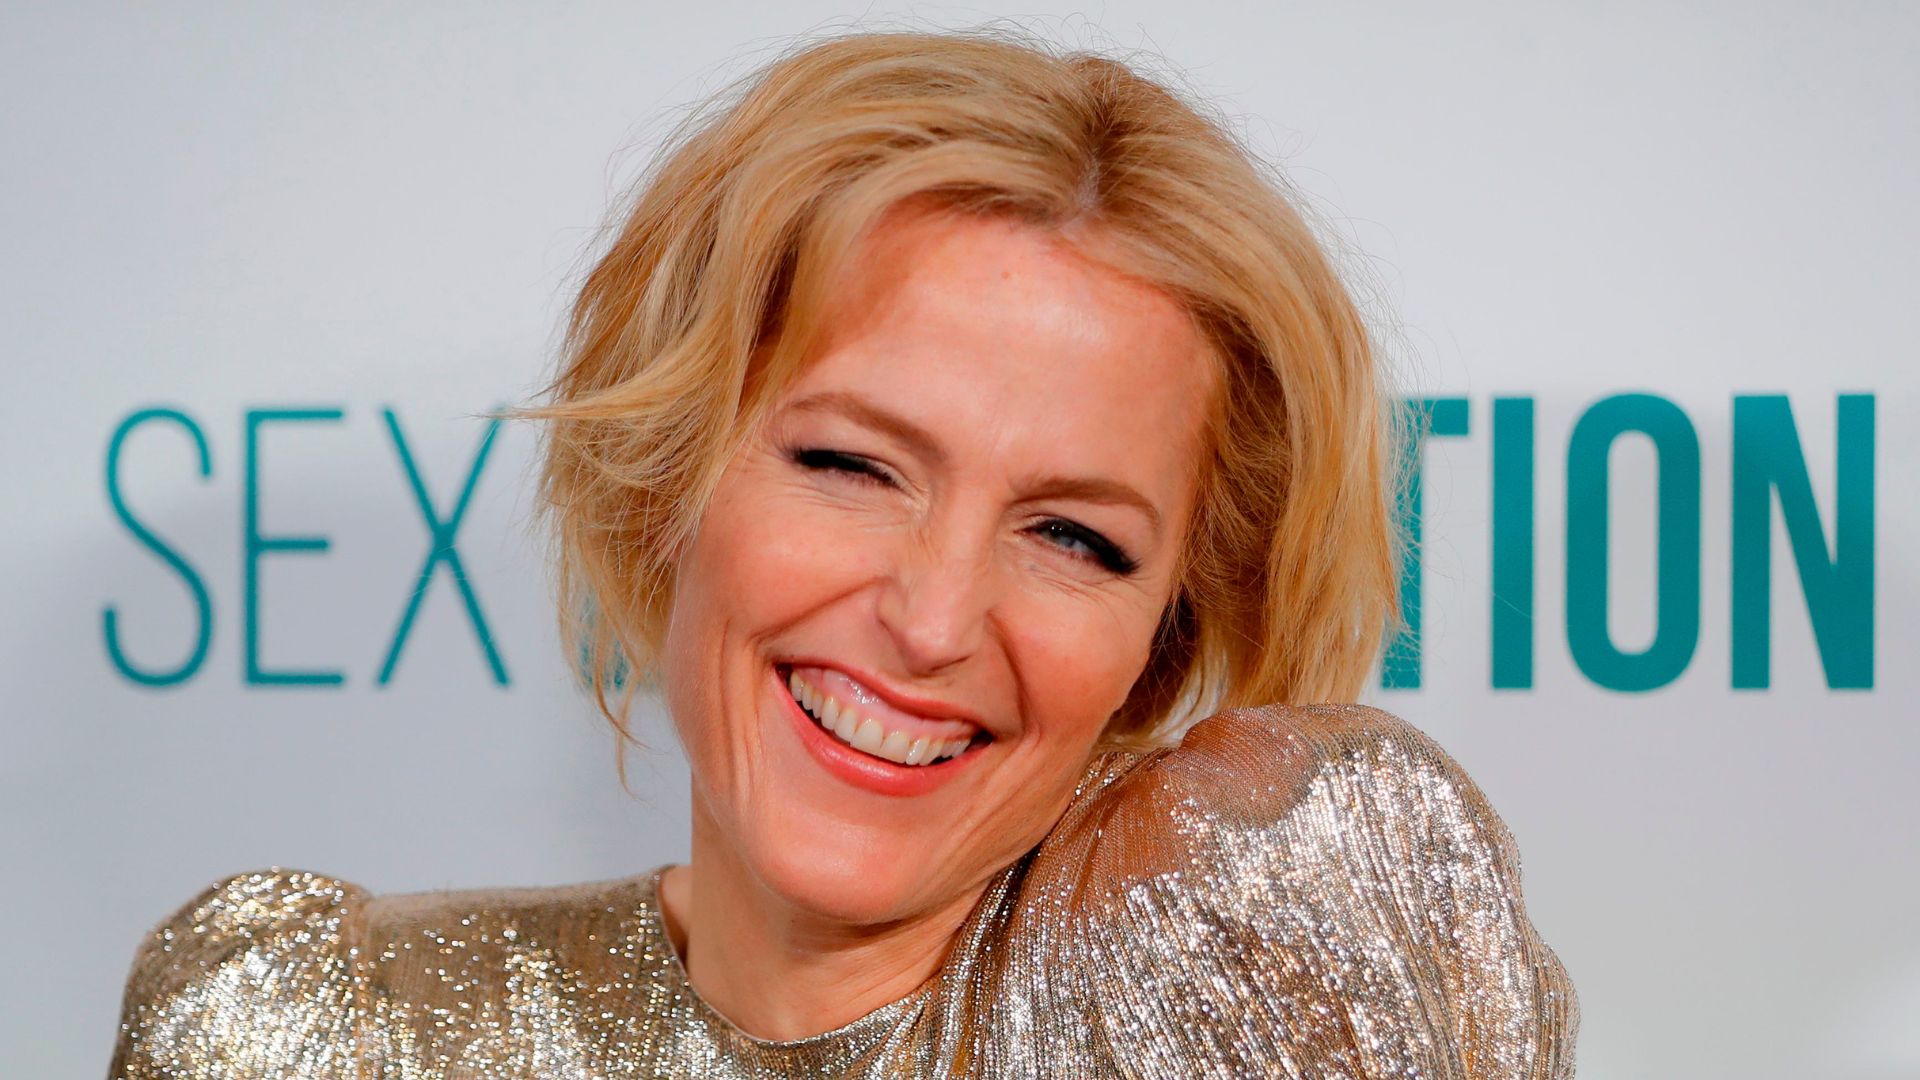 Gillian Anderson has a libido-boosting drink launching | Woman & Home